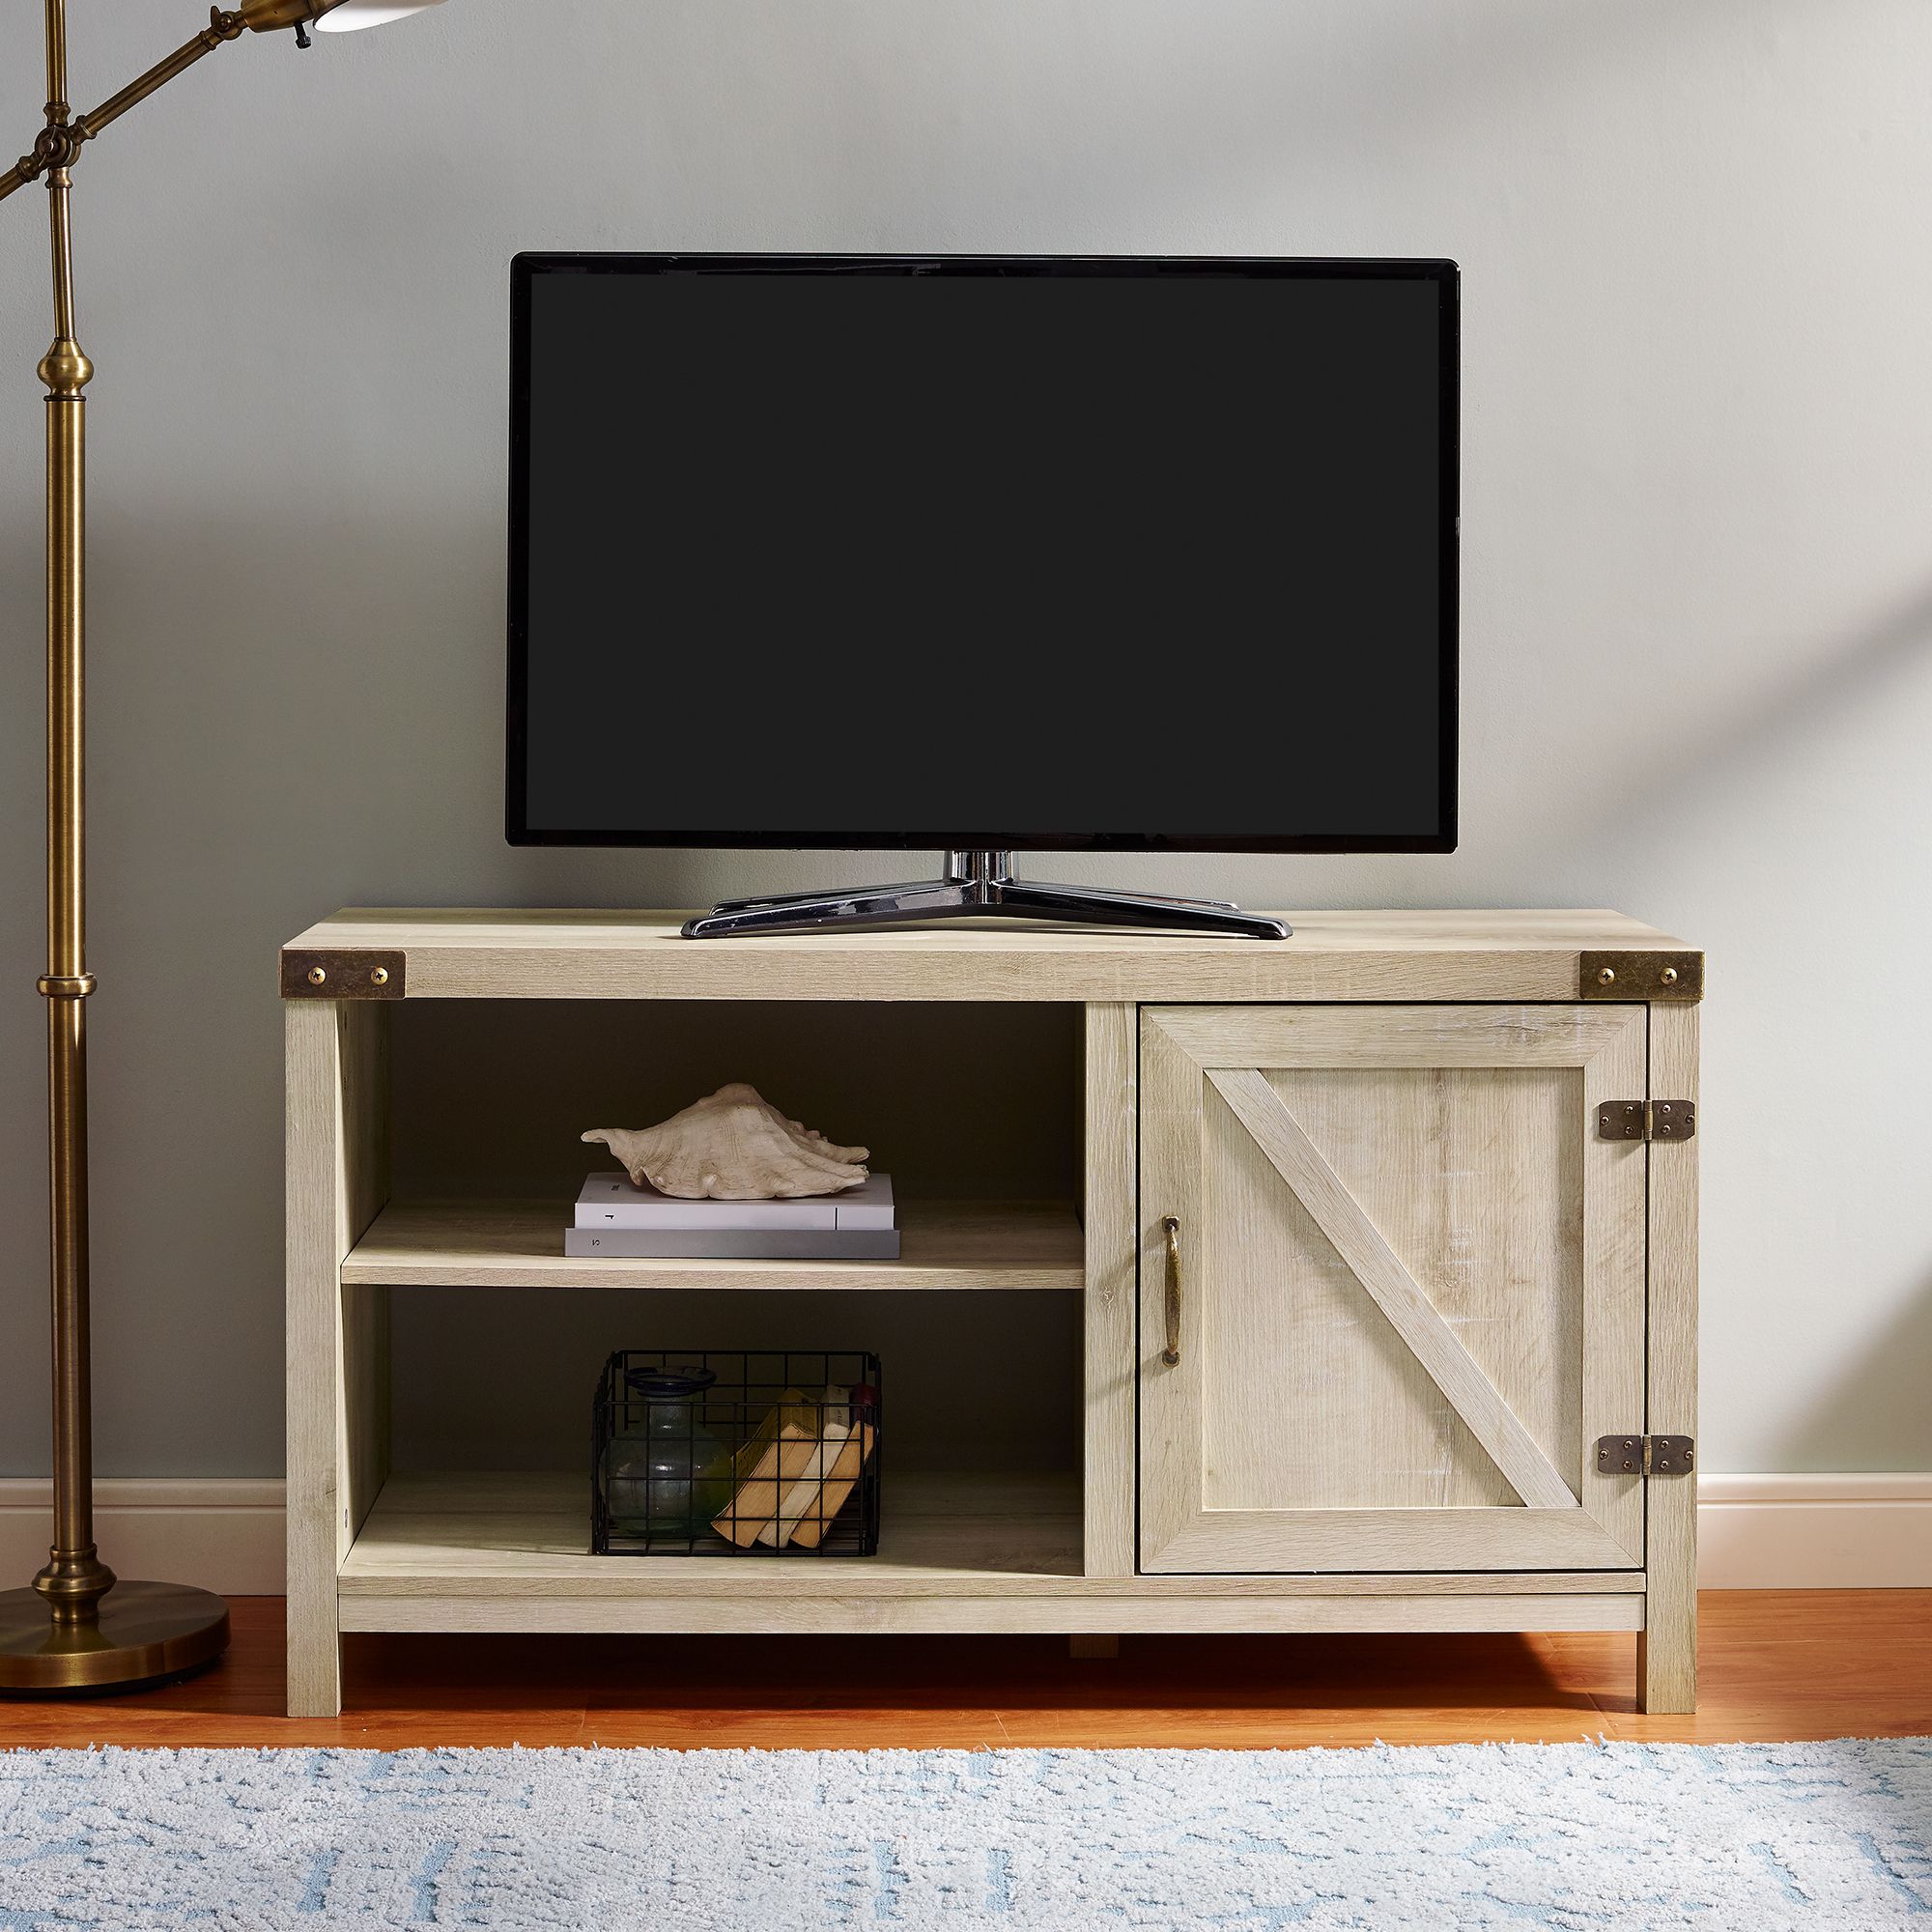 Woven Paths Farmhouse Barn Door Tv Stand For Tvs Up To 50 Throughout Virginia Tv Stands For Tvs Up To 50&quot; (View 6 of 20)